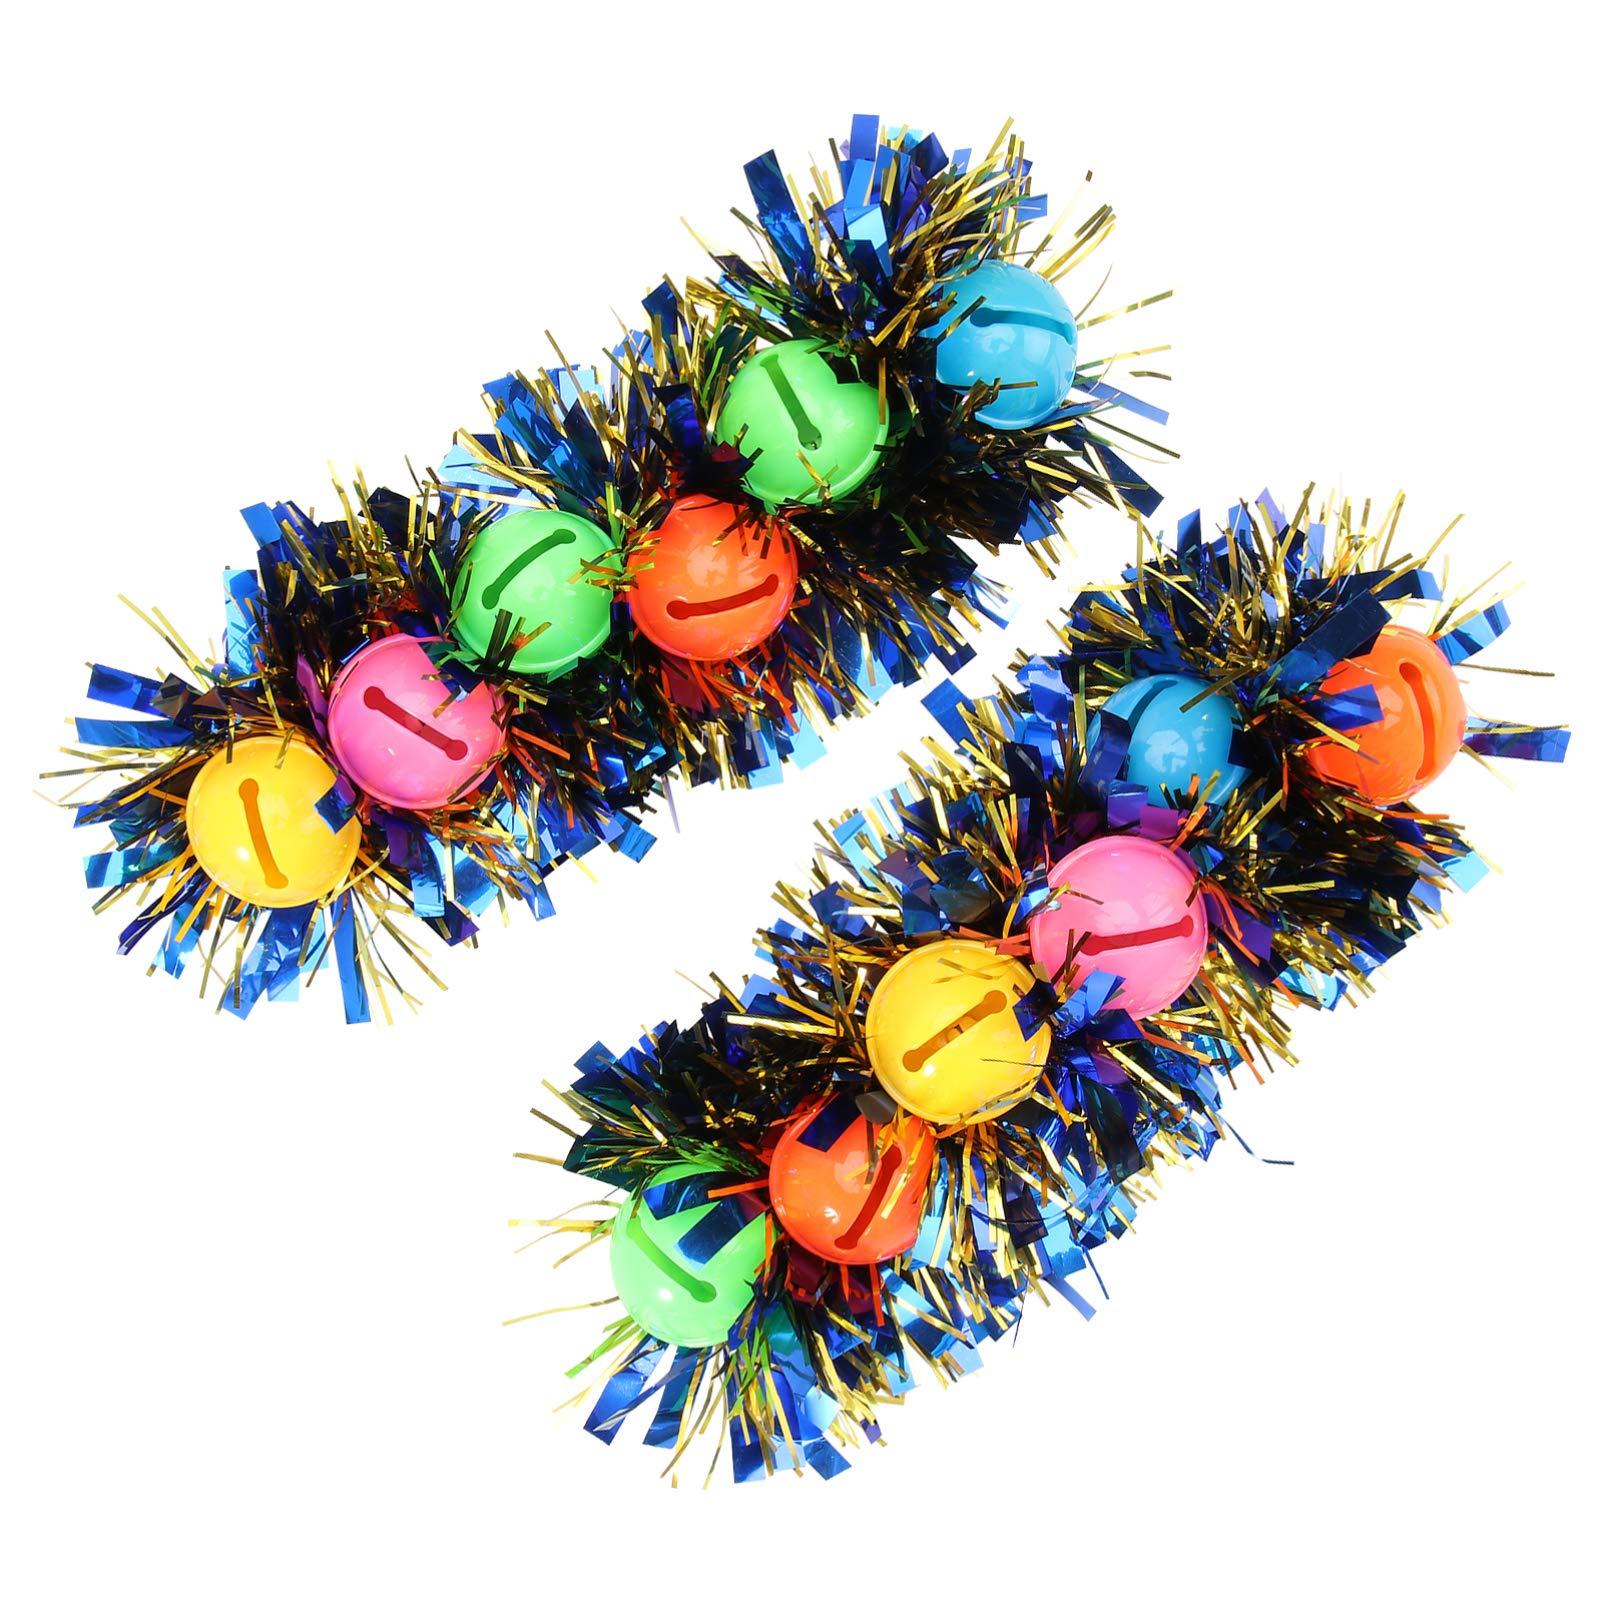 Amosfun 2Pcs Christmas Band Wrist Bells Christmas Jingle Bells Bracelet With Glitter Tinsel Wristband For Christmas Carnival Party Instrument Percussion Rhythm Toys Supplies (Blue)